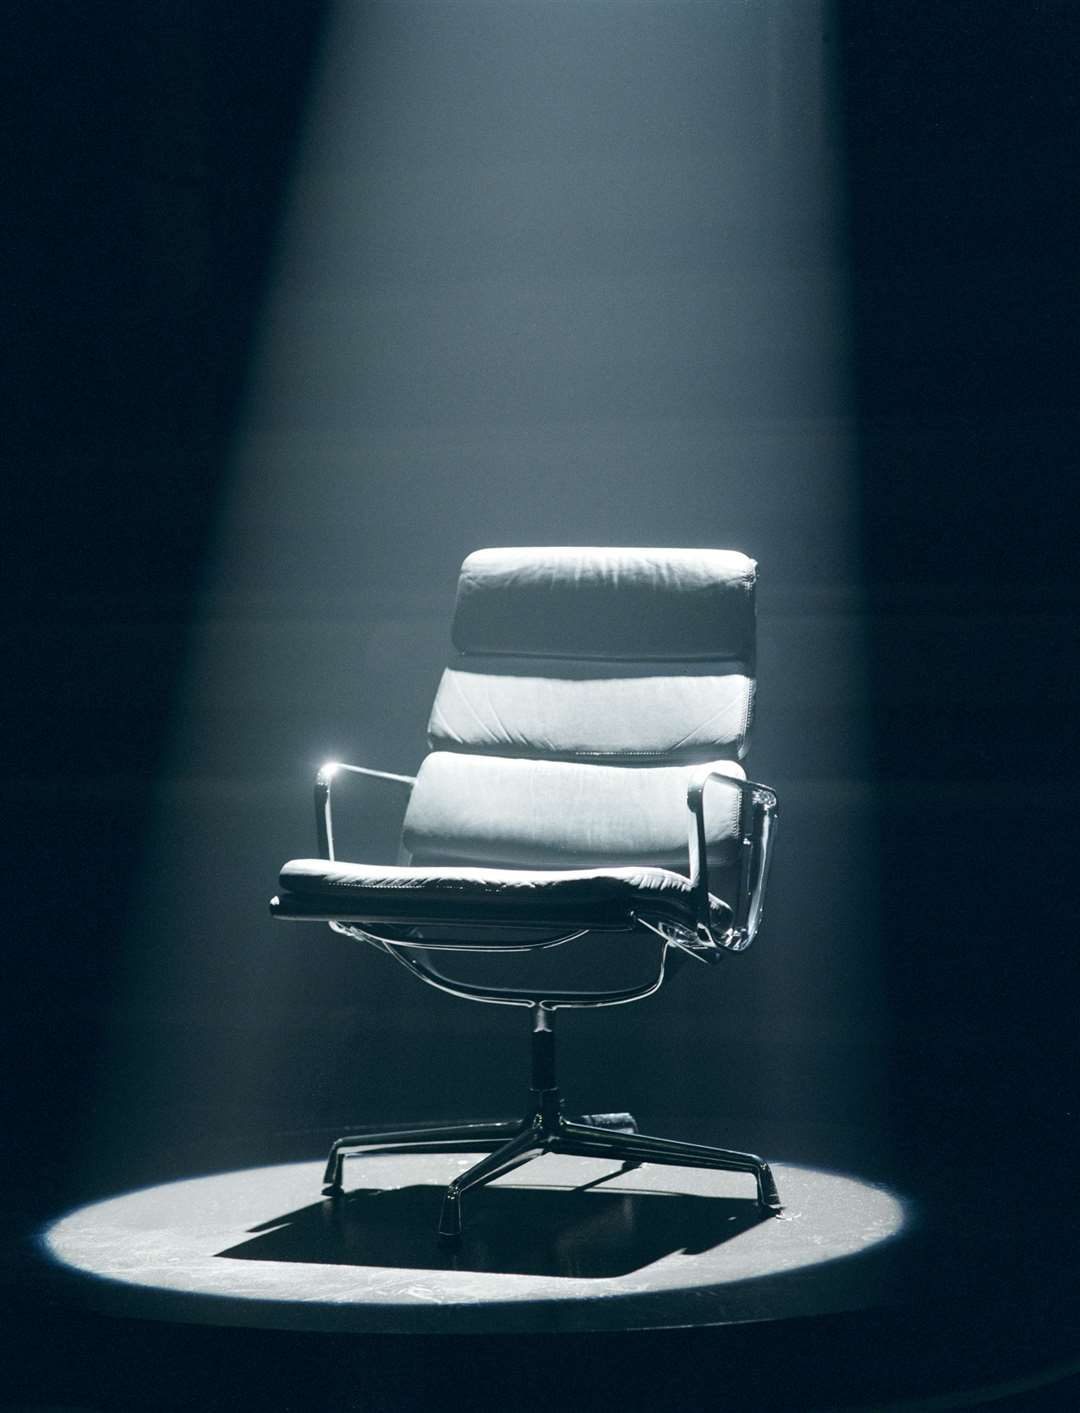 The famous Mastermind black chair. Picture: BBC